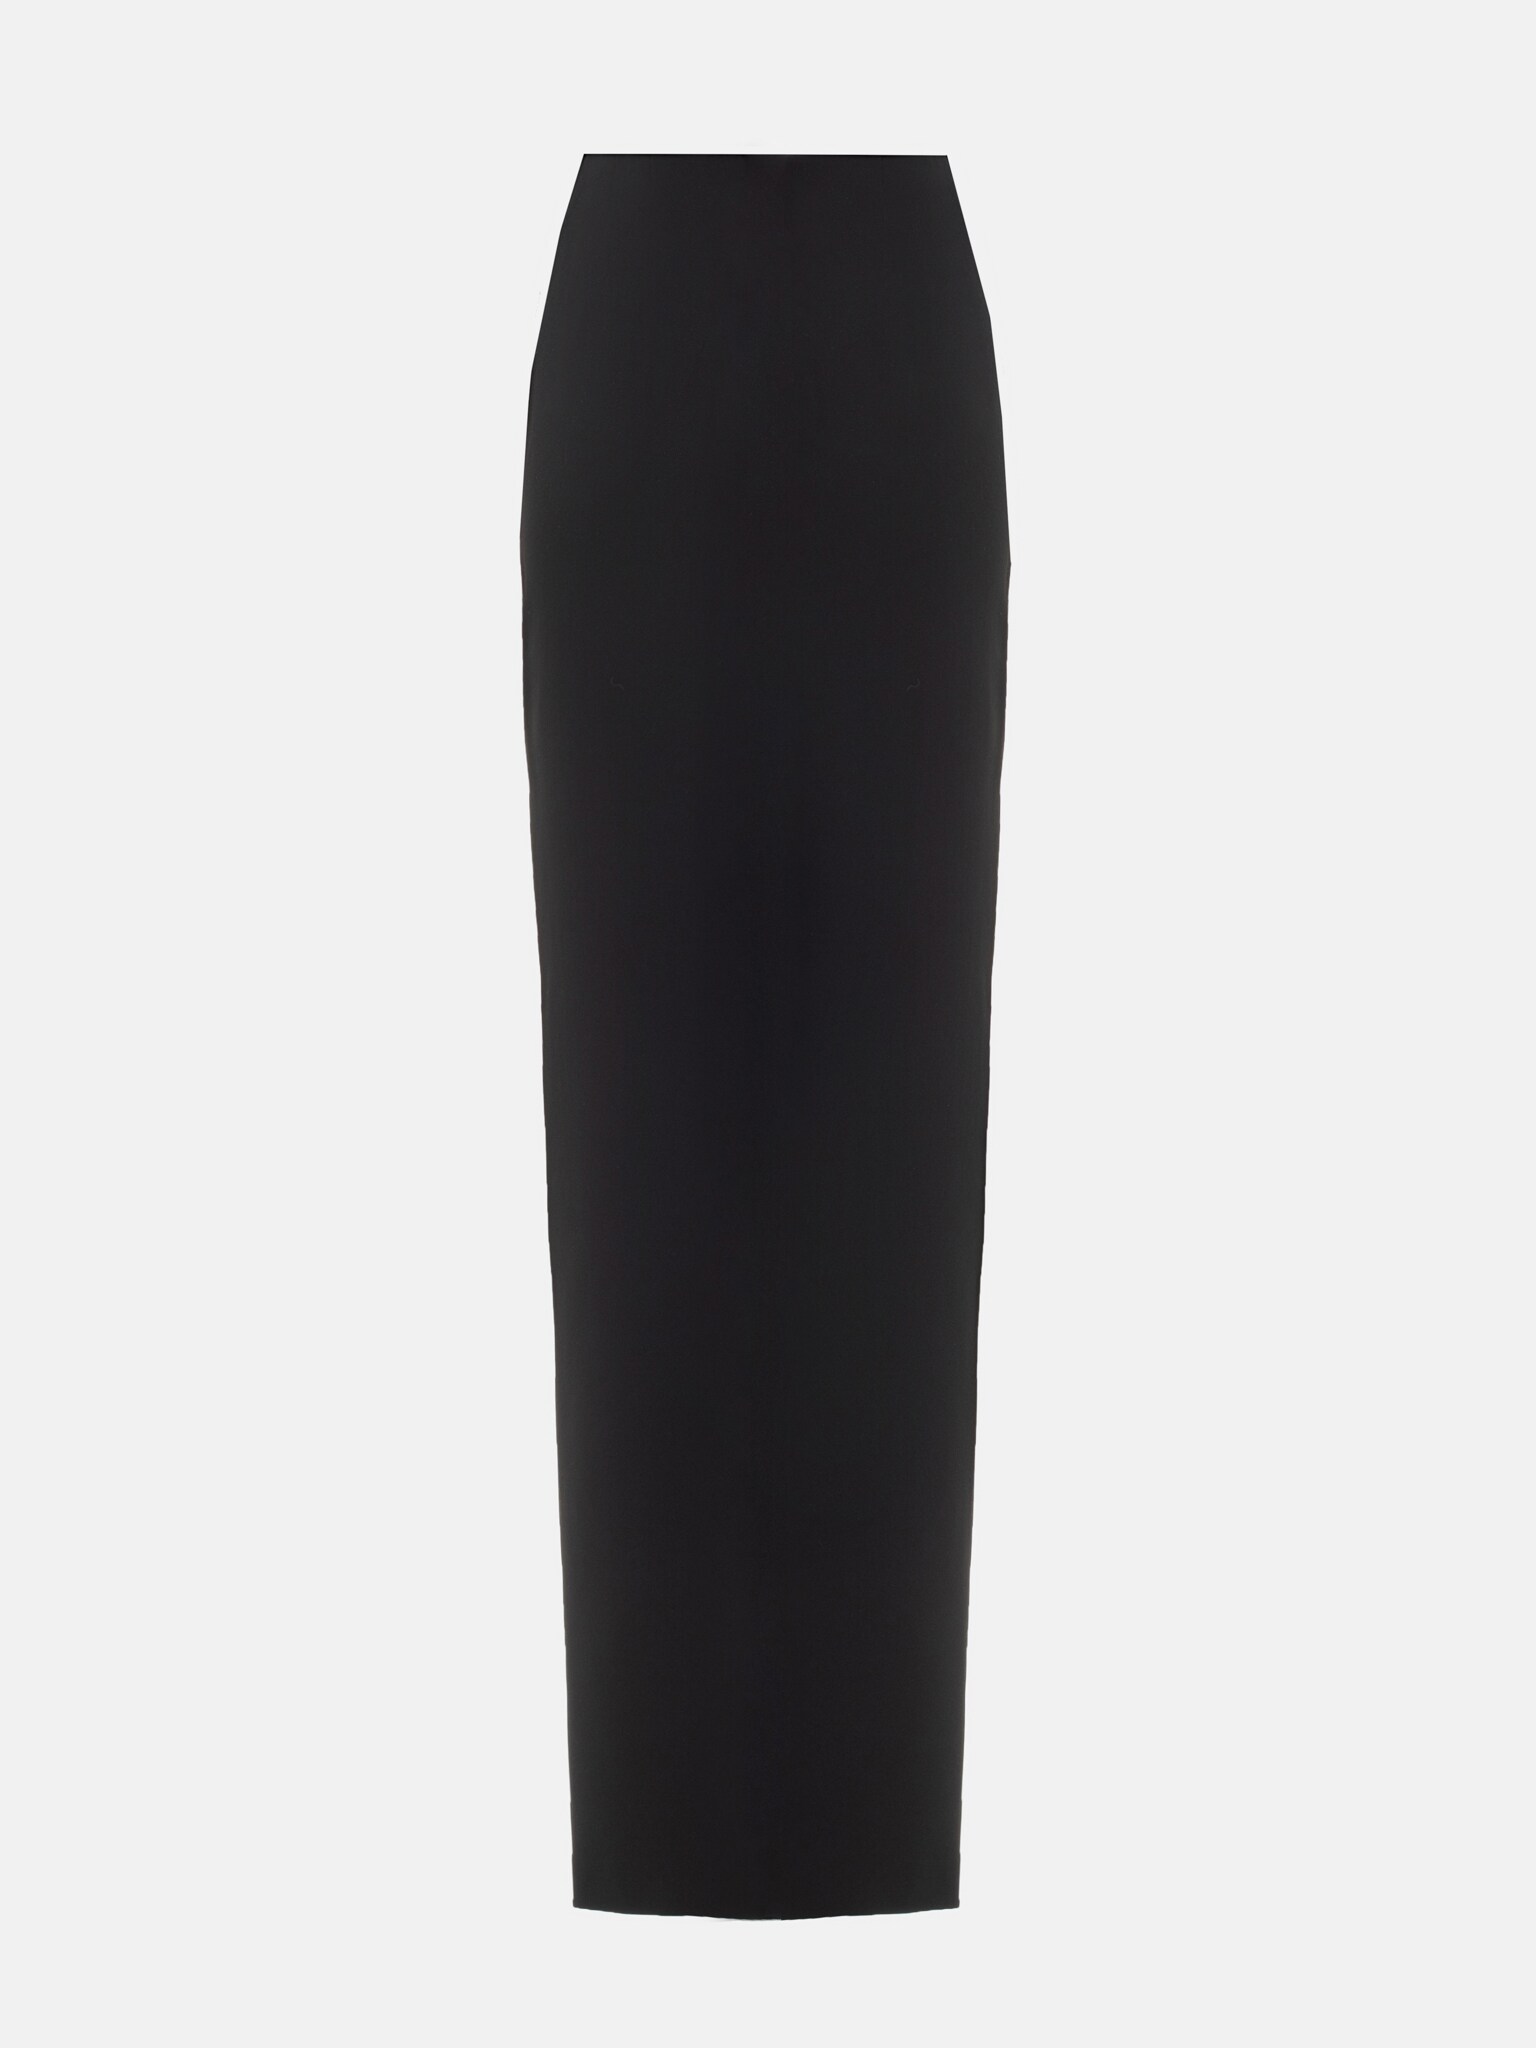 Pencil skirt in maxi length :: LICHI - Online fashion store